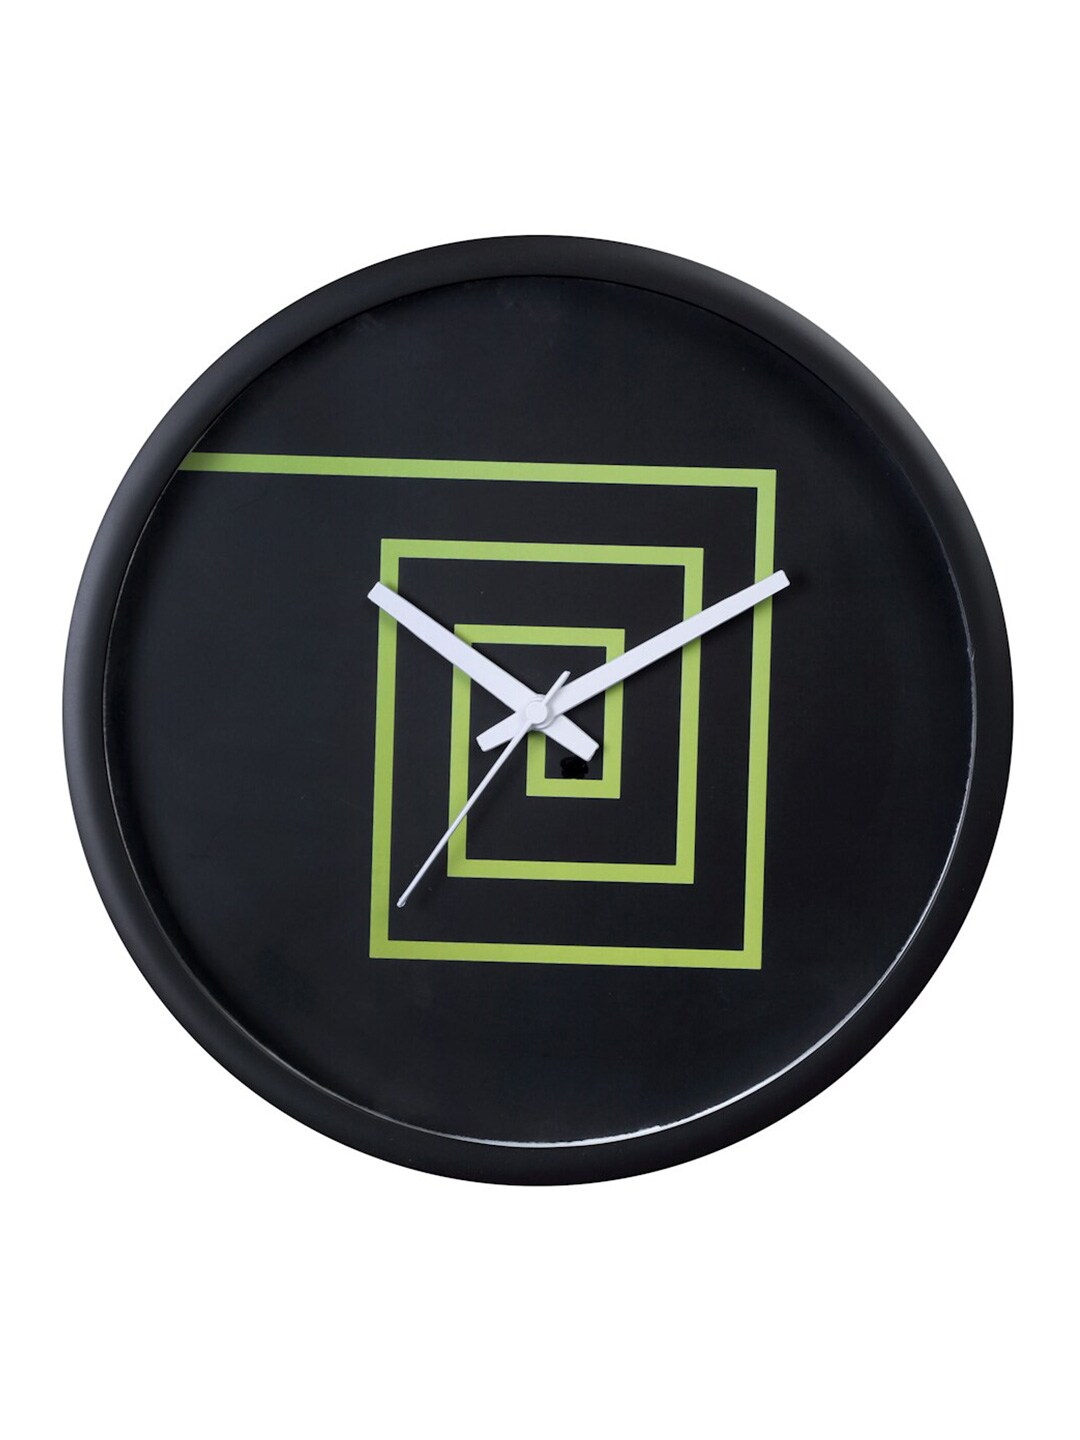 Bodh Design Black & Green Printed Contemporary 28 Cm Analogue Wall Clock Price in India